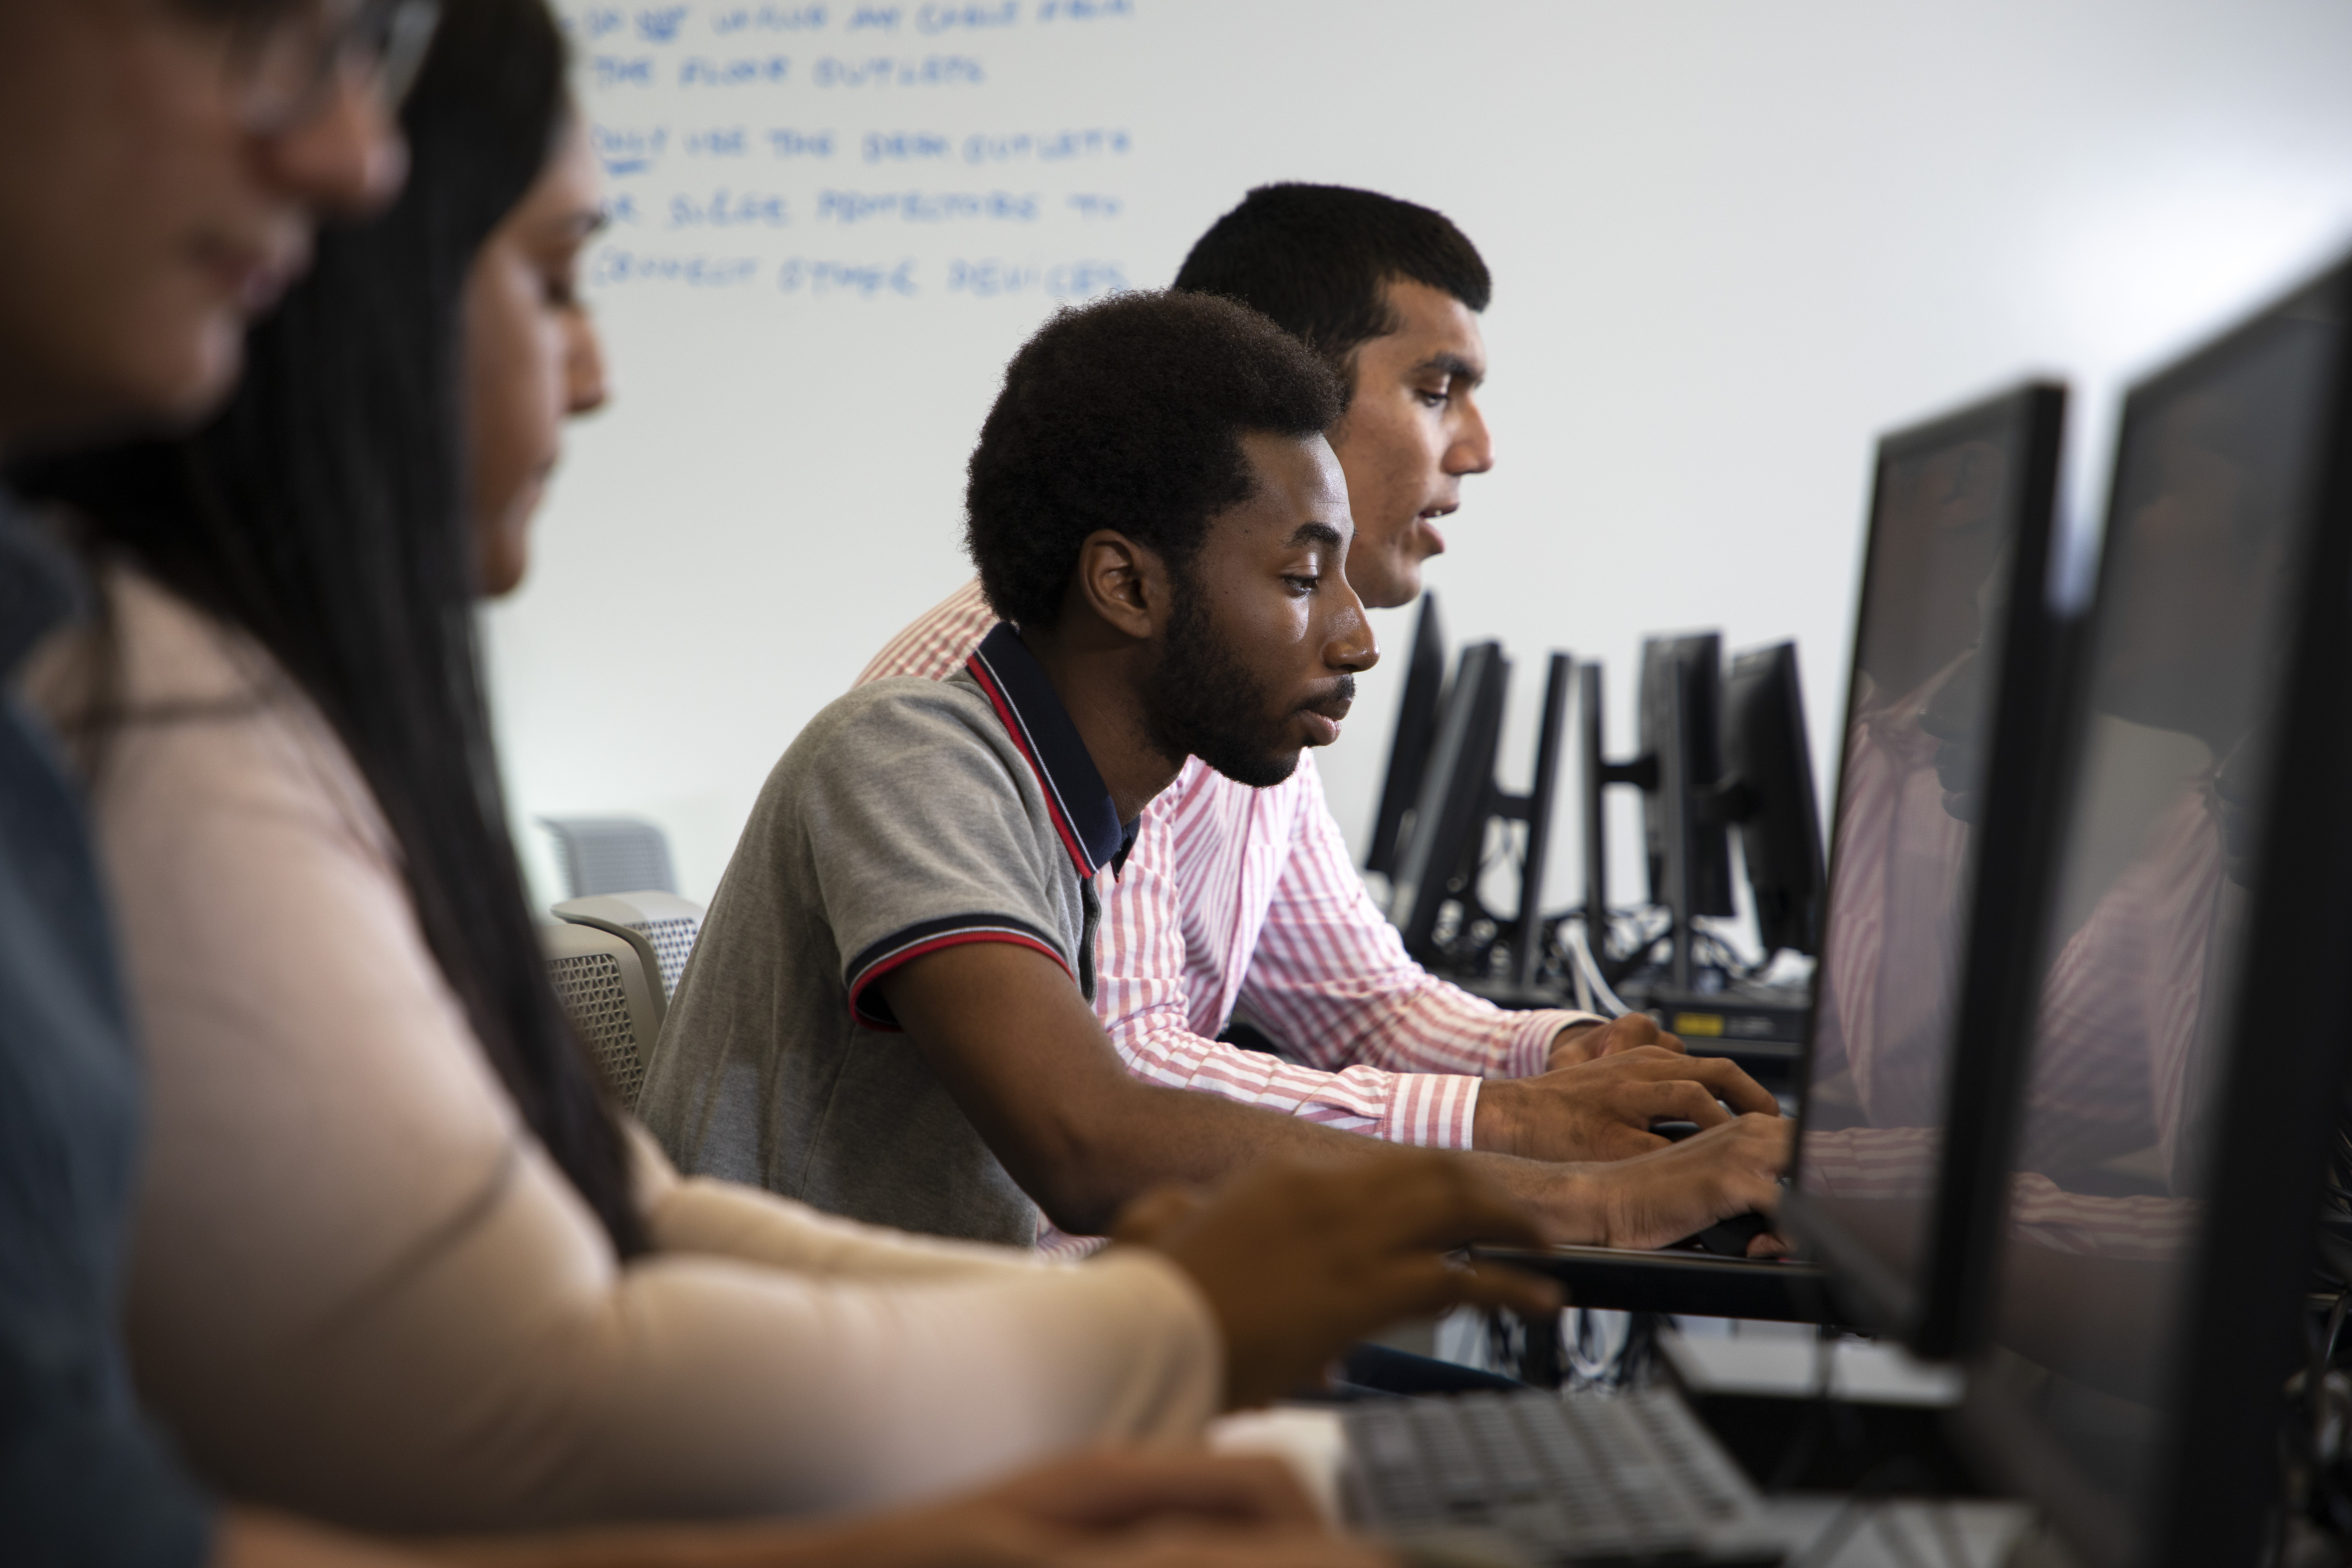 Students work on a project in a computer classroom for digital forensics